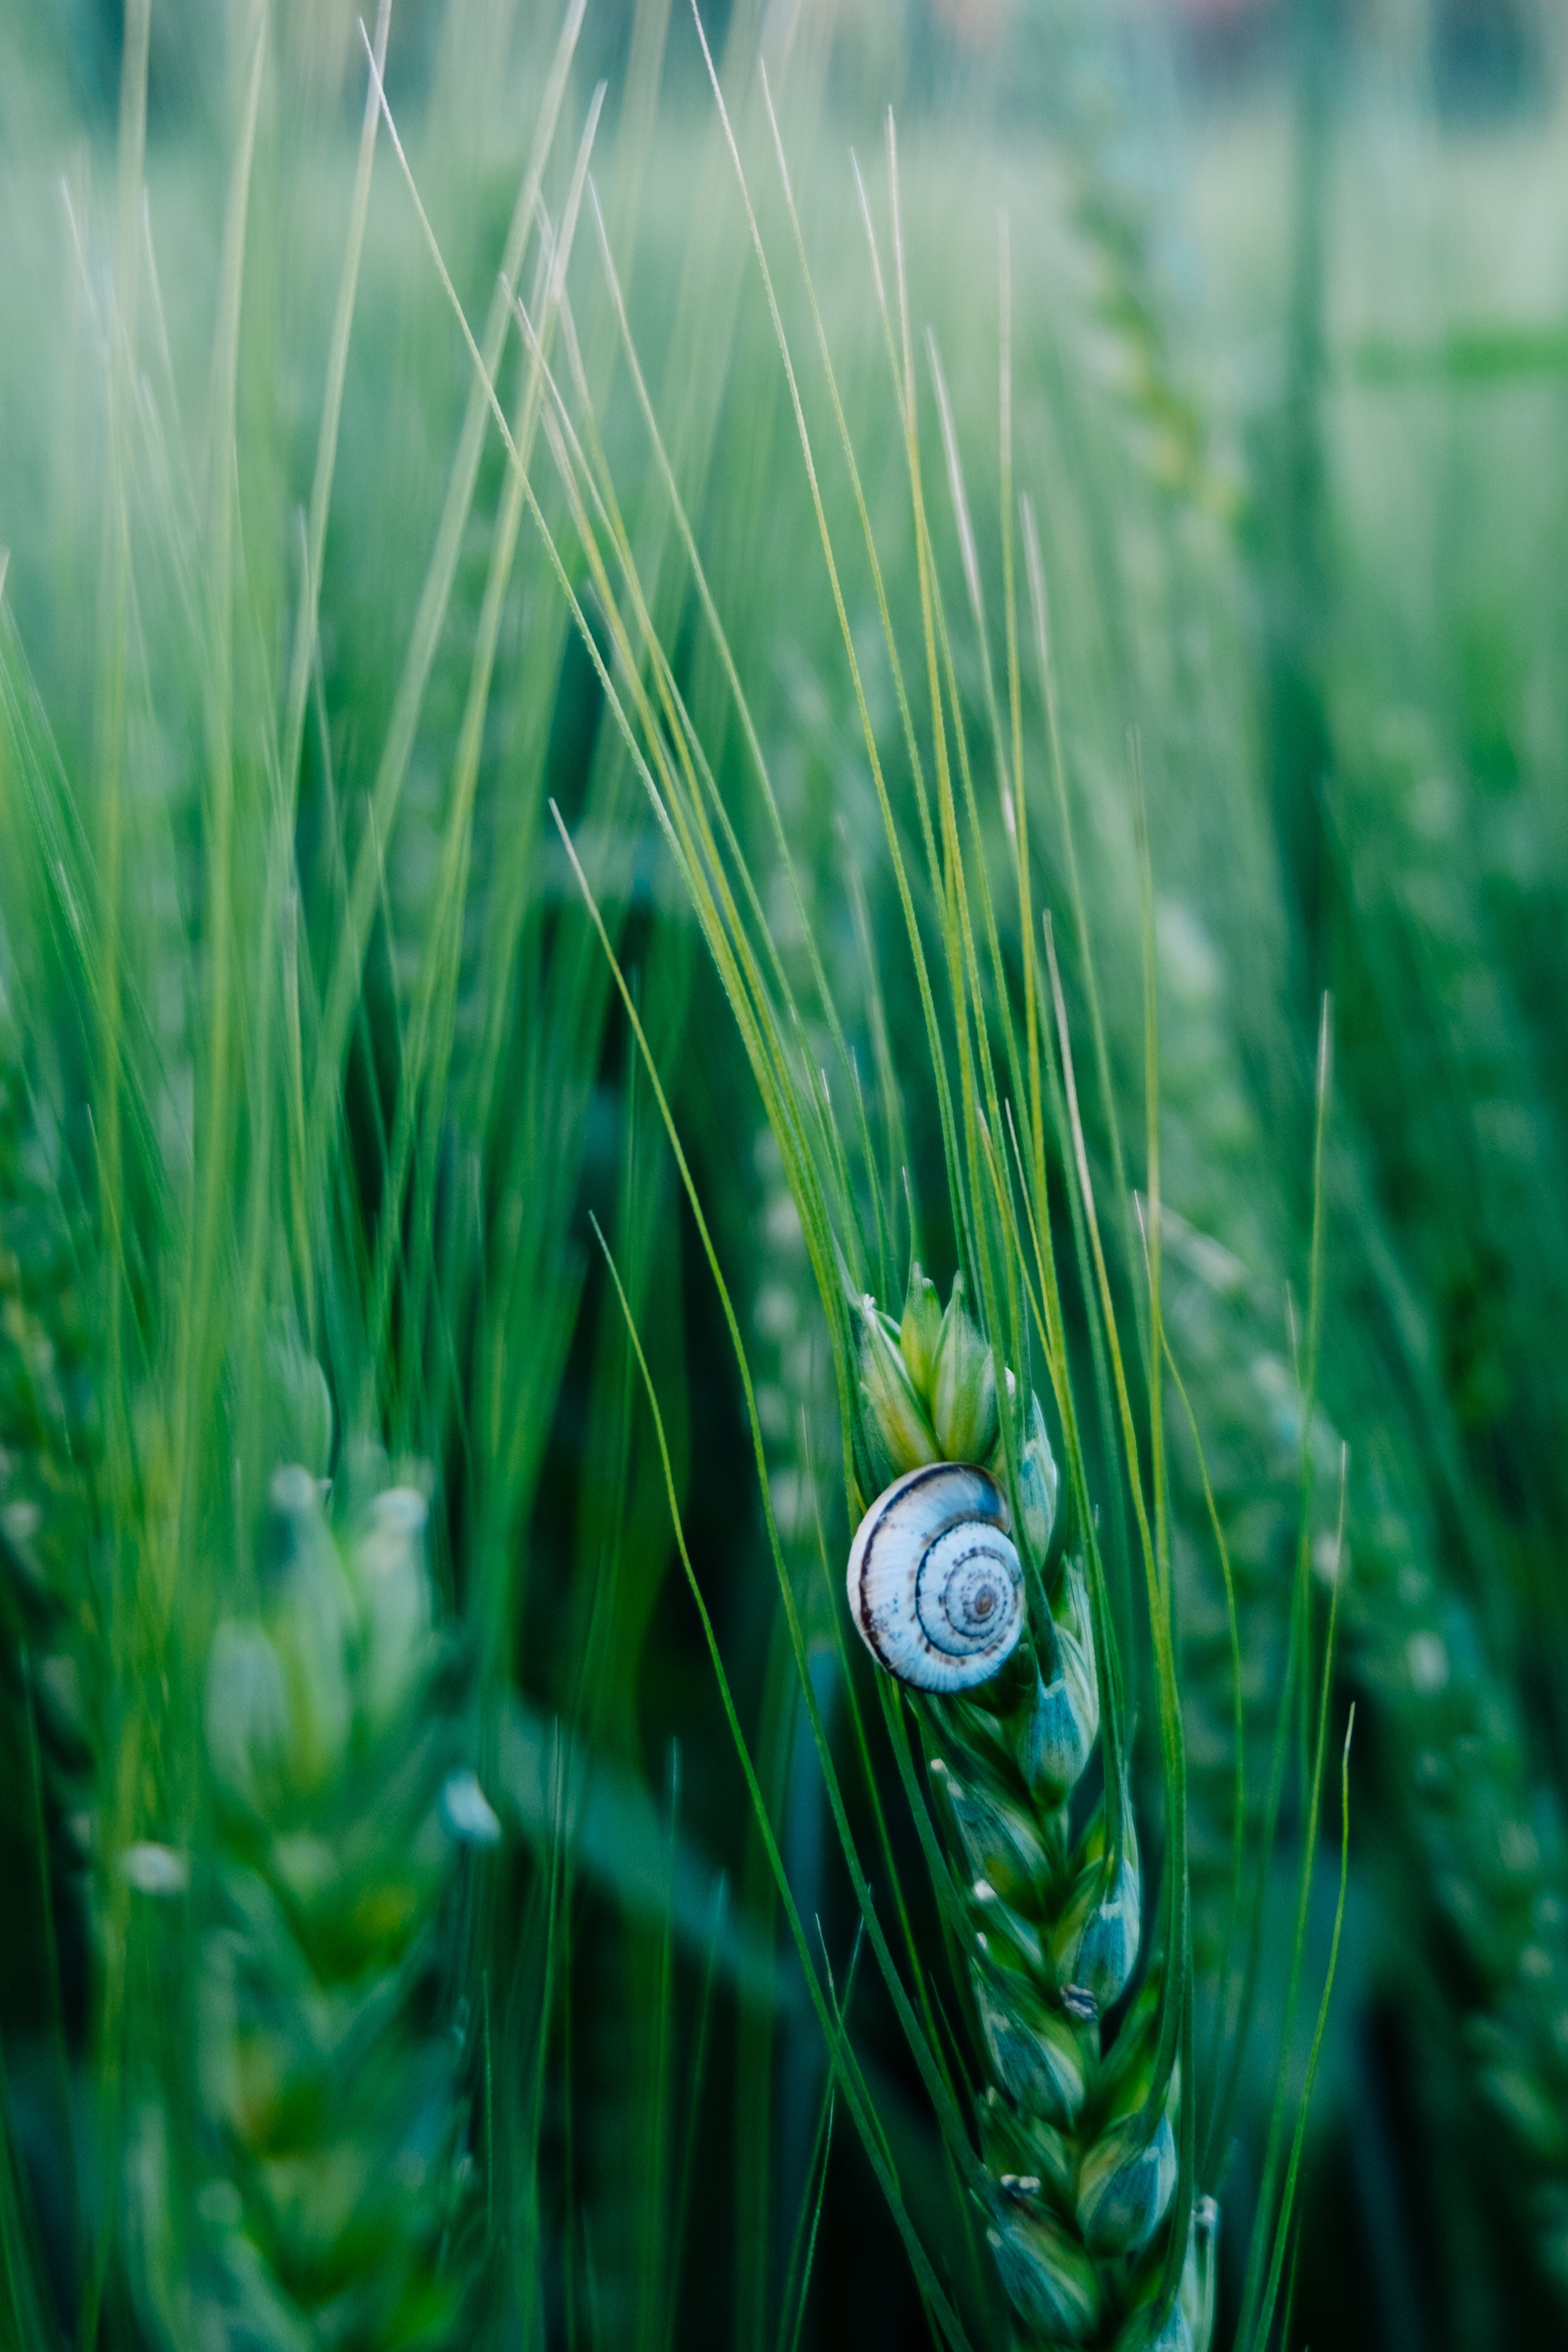 132908 download wallpaper grass, green, macro, ears, snail, spikes, carapace, shell screensavers and pictures for free